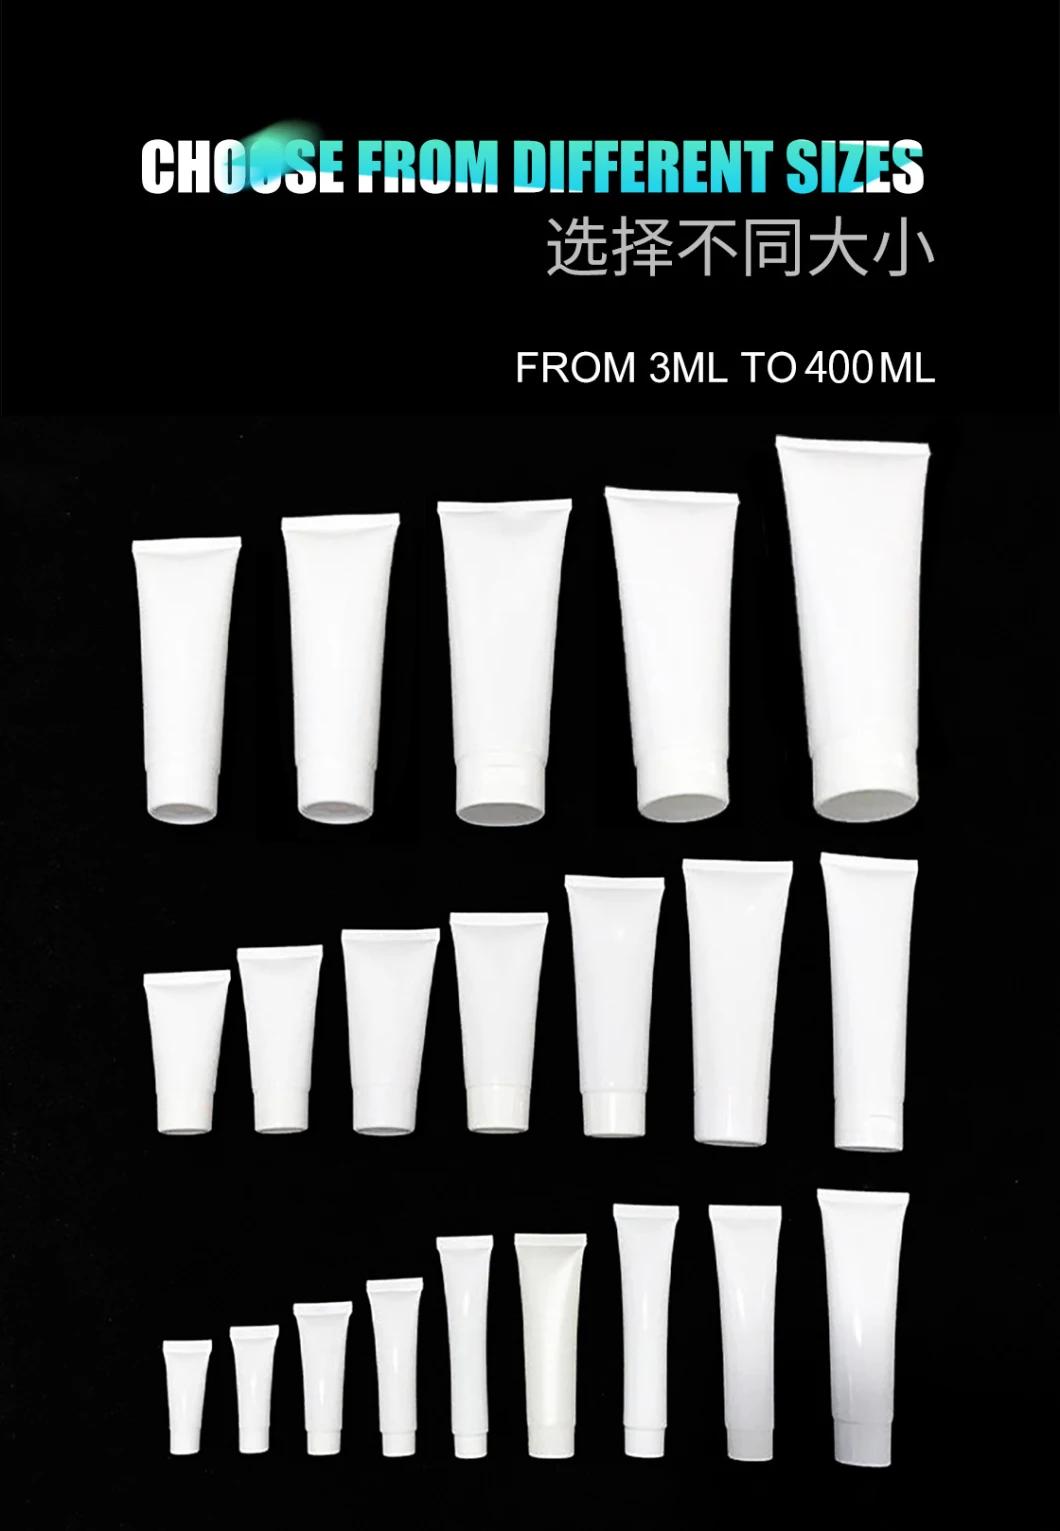 Clear Refillable Empty Plastic Squeeze Soft Tubes for Body Lotion Shower Gel Shampoo Cleanser Pack